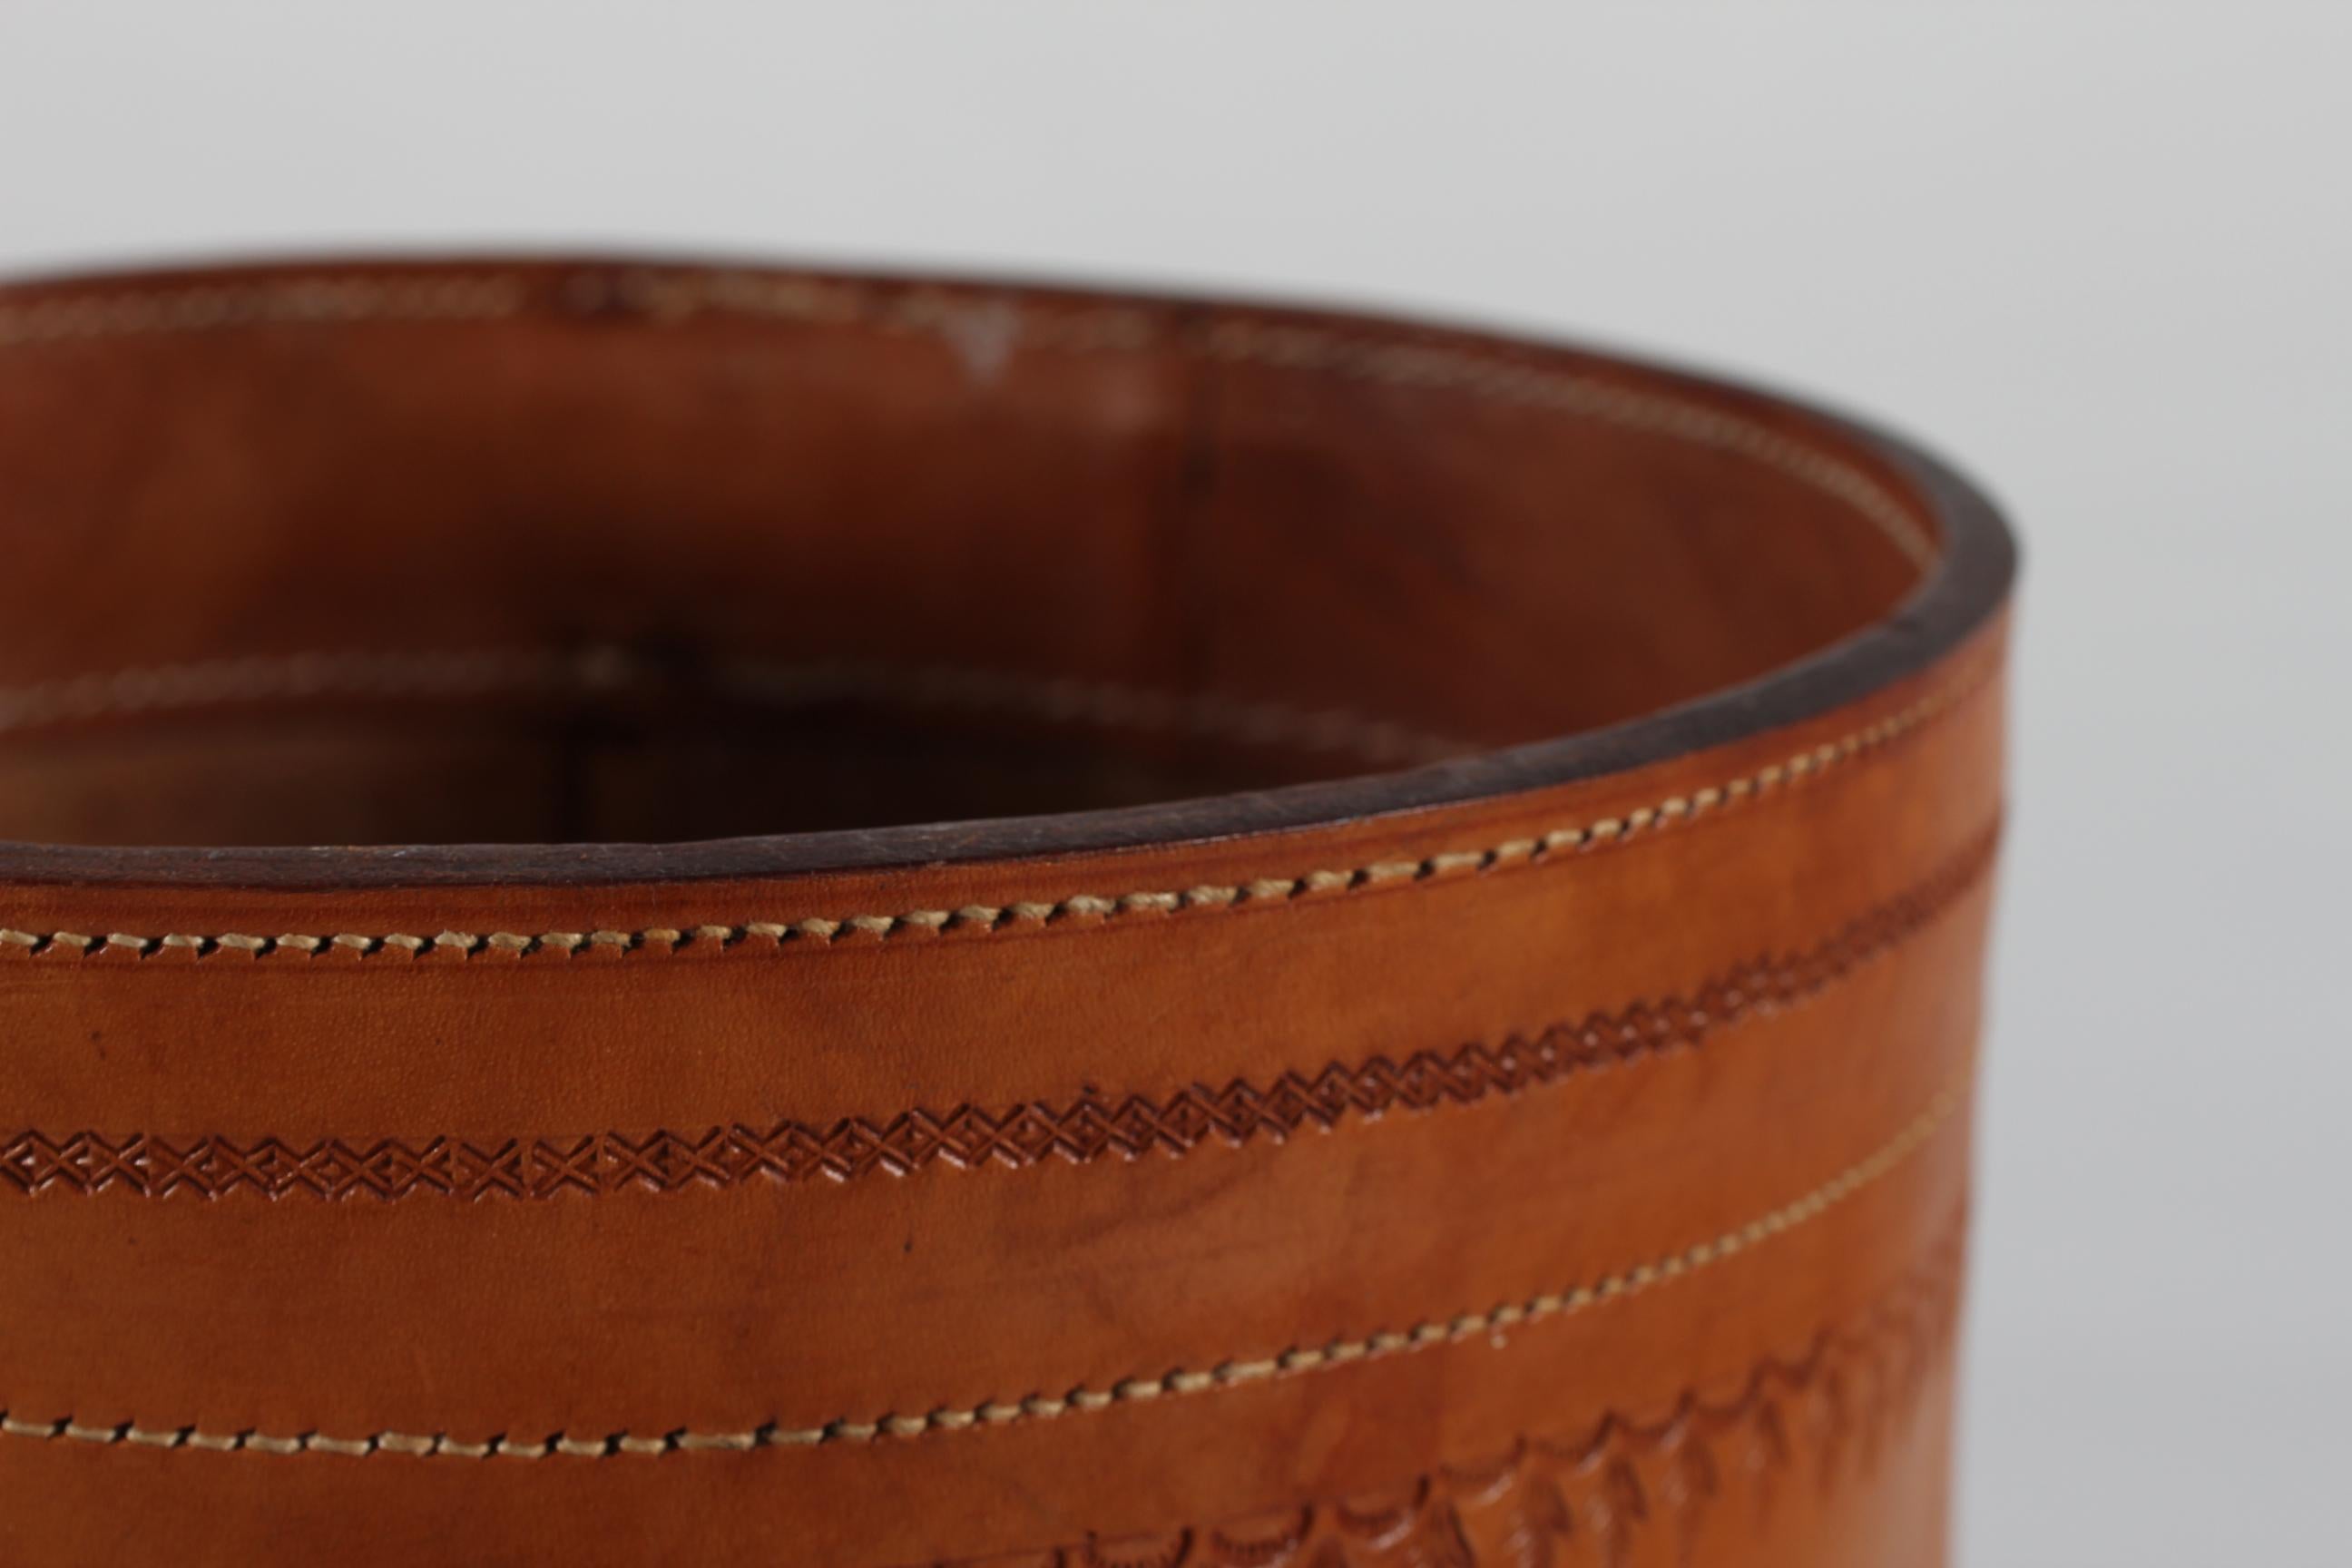 Round European vintage wastepaper basket from the 1970s.
It's made of strong genuine cognac colored core leather with incised pattern and visible stitching 
It remains in very good condition with a beautiful patina.
     